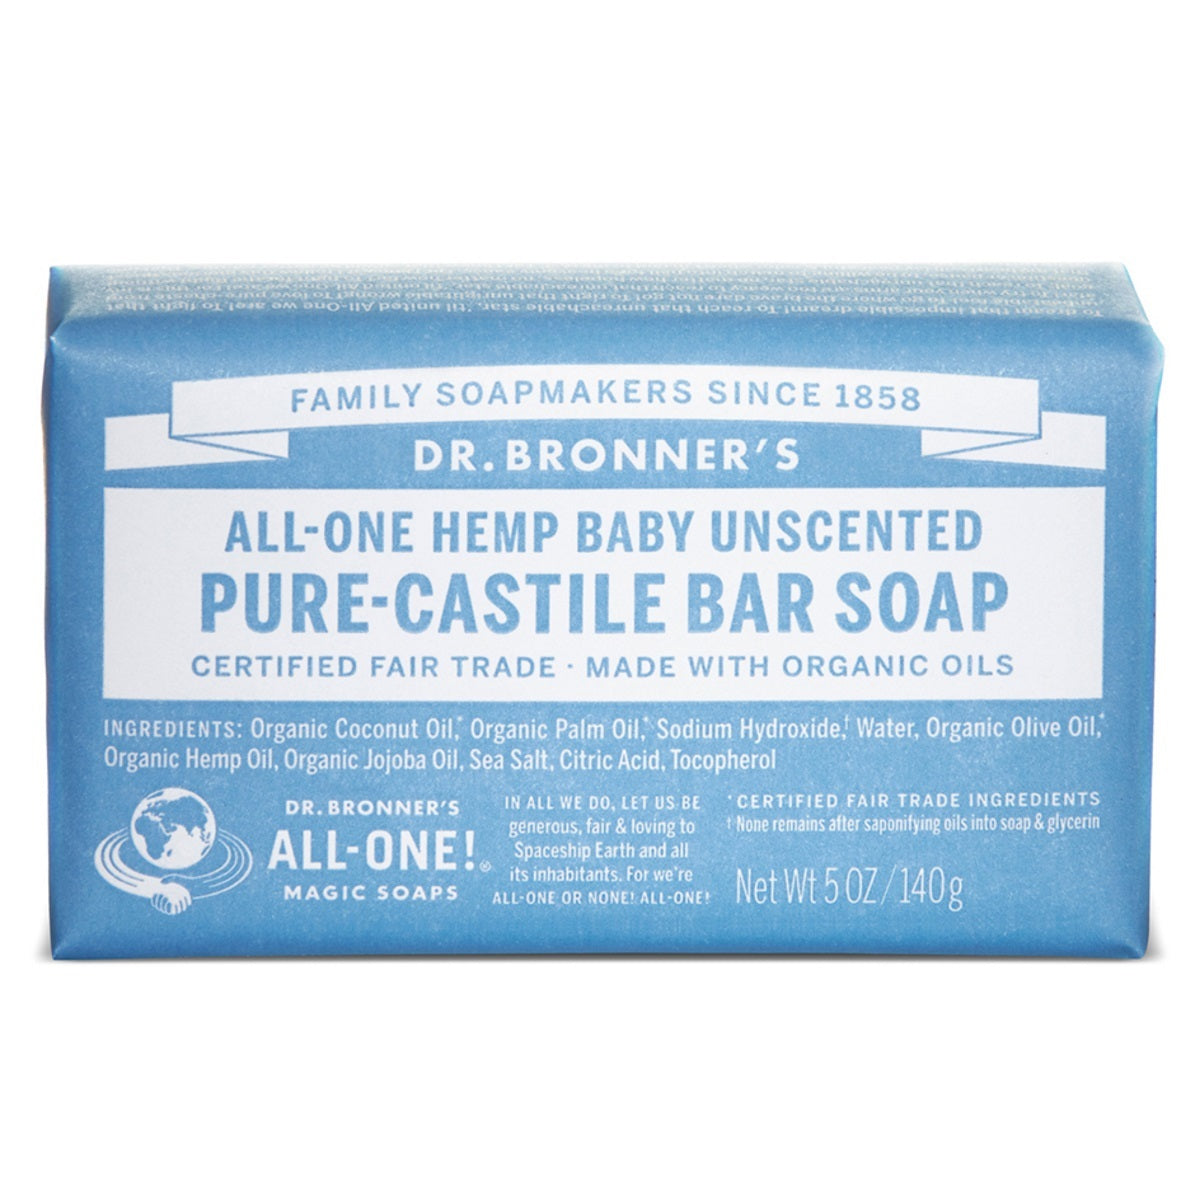 Primary image of Baby Unscented Castile Bar Soap